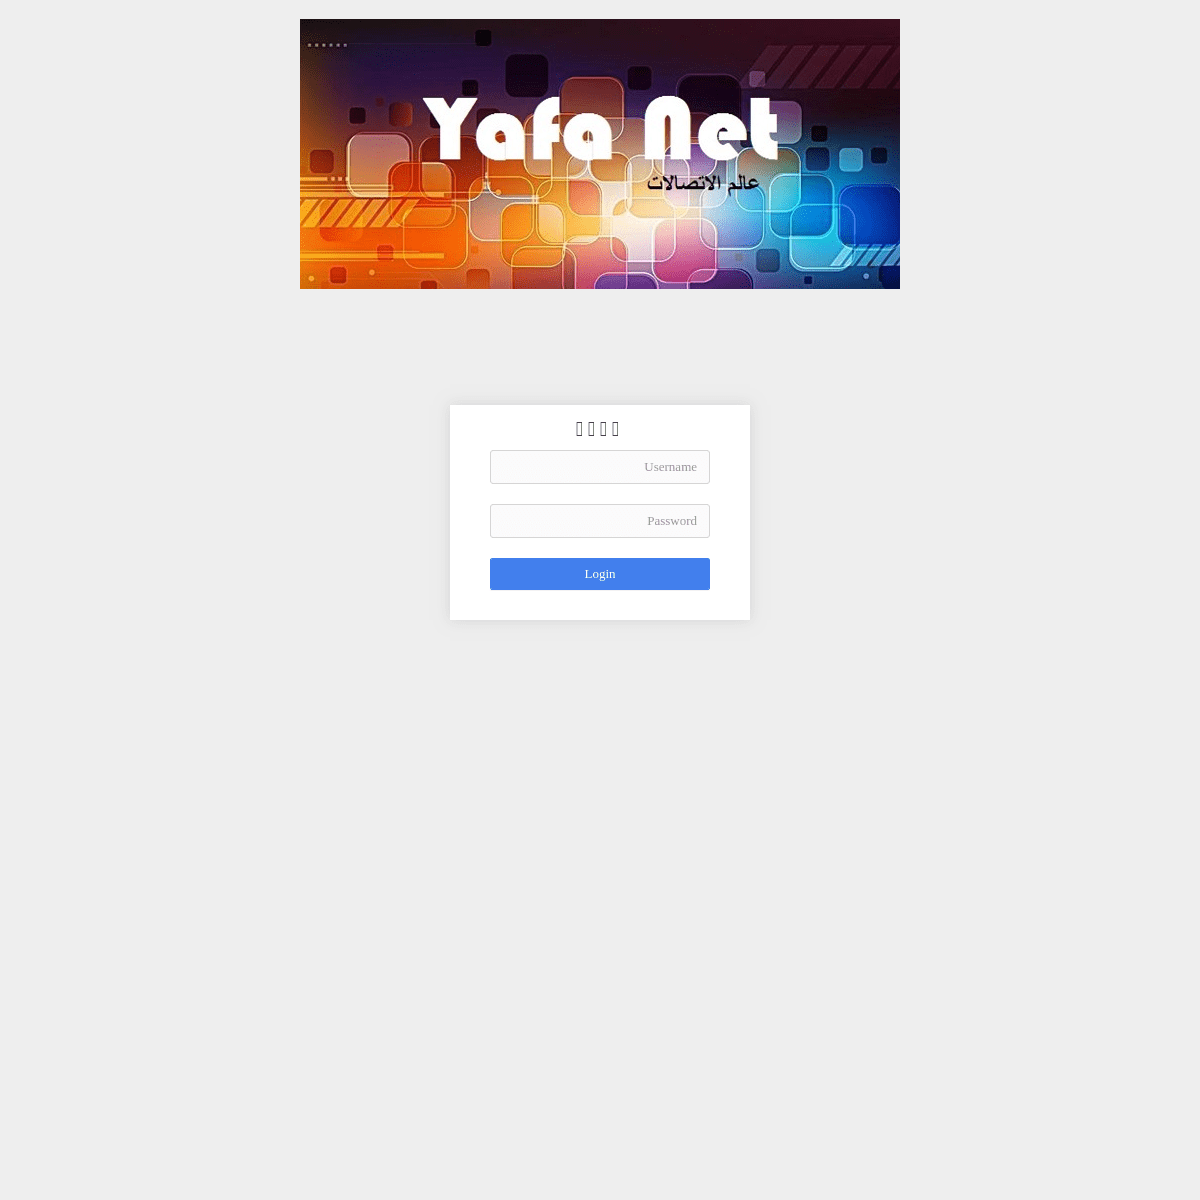 A complete backup of yafanet.com